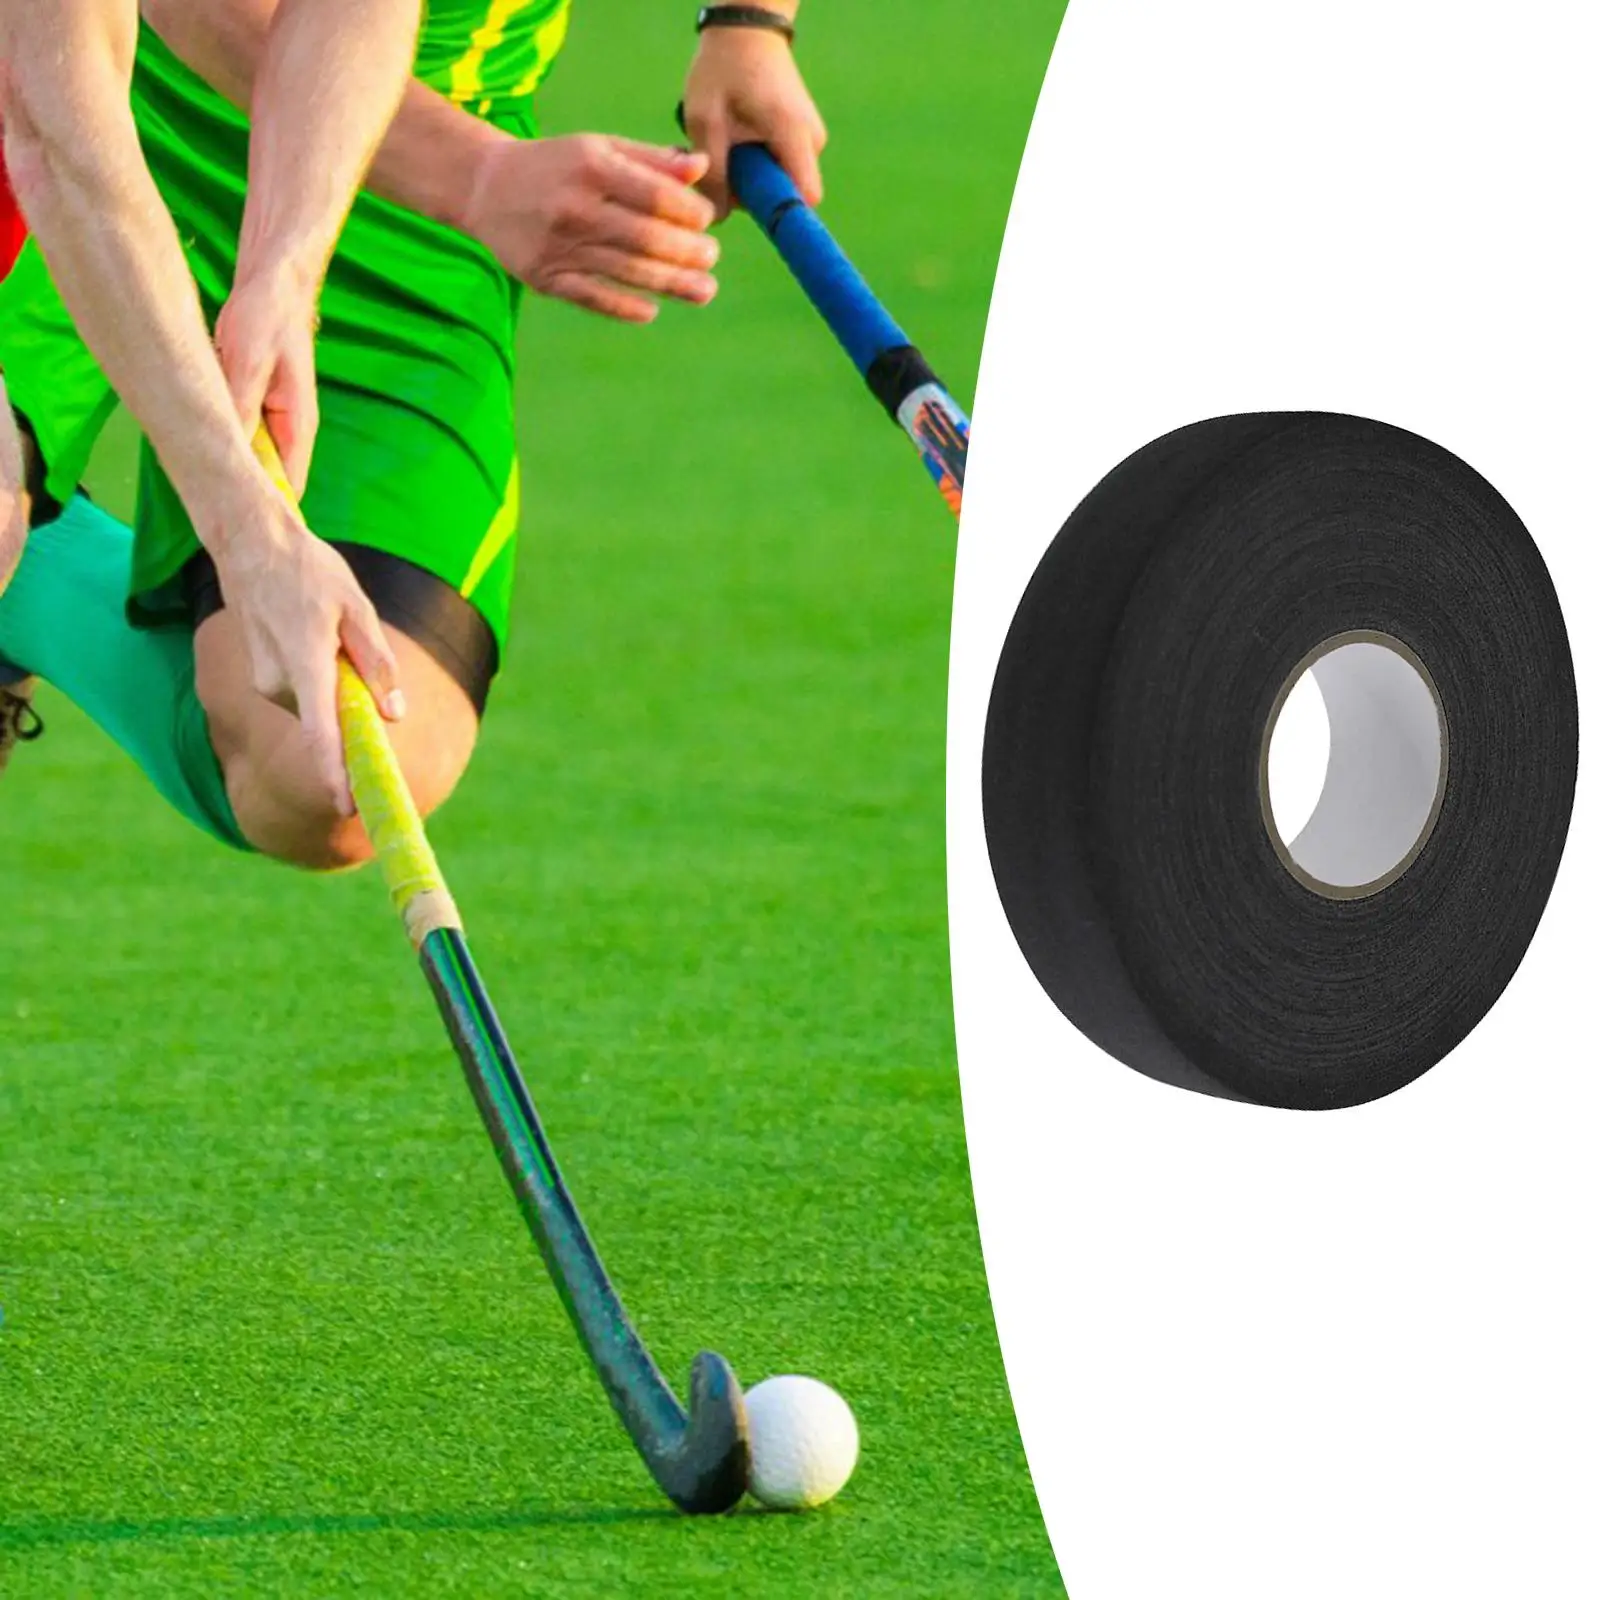 Ice Hockey Cloth Tape 82ft Water Resistant Sports Tape Roller Hockey Wrapping Belt Hockey Stick Tapes for Sports Badminton Grip